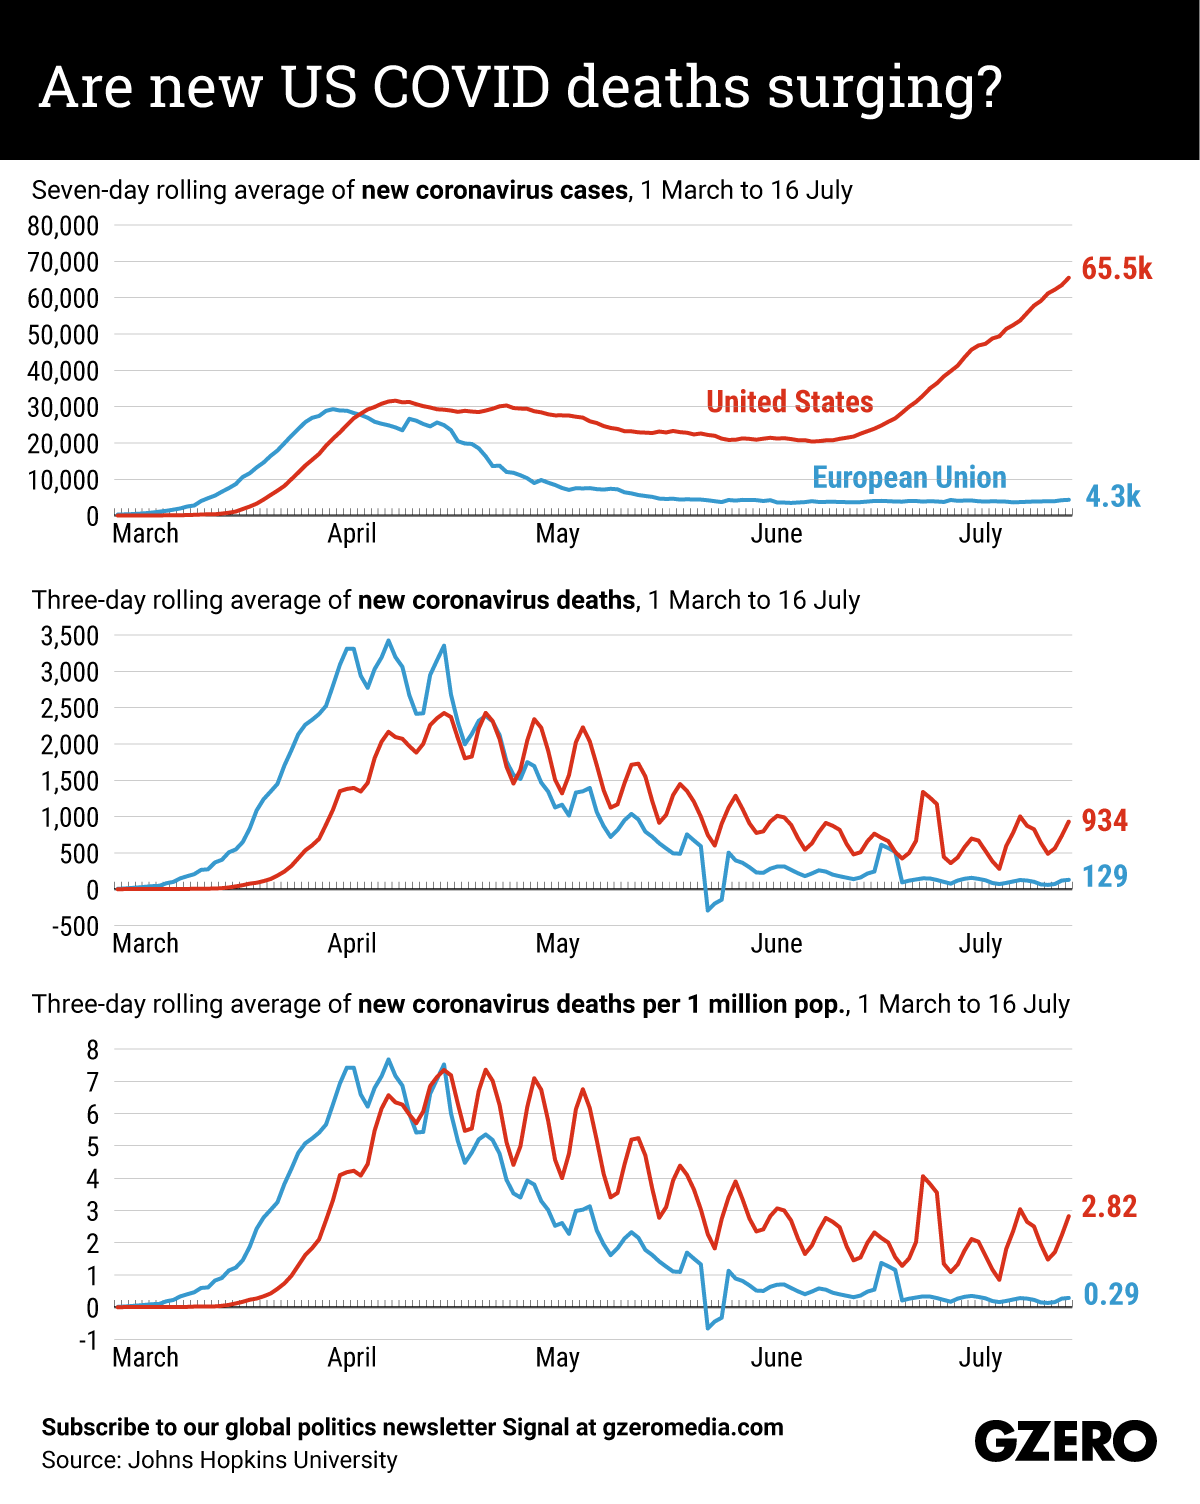 The Graphic Truth: Are new US COVID deaths surging vs EU?